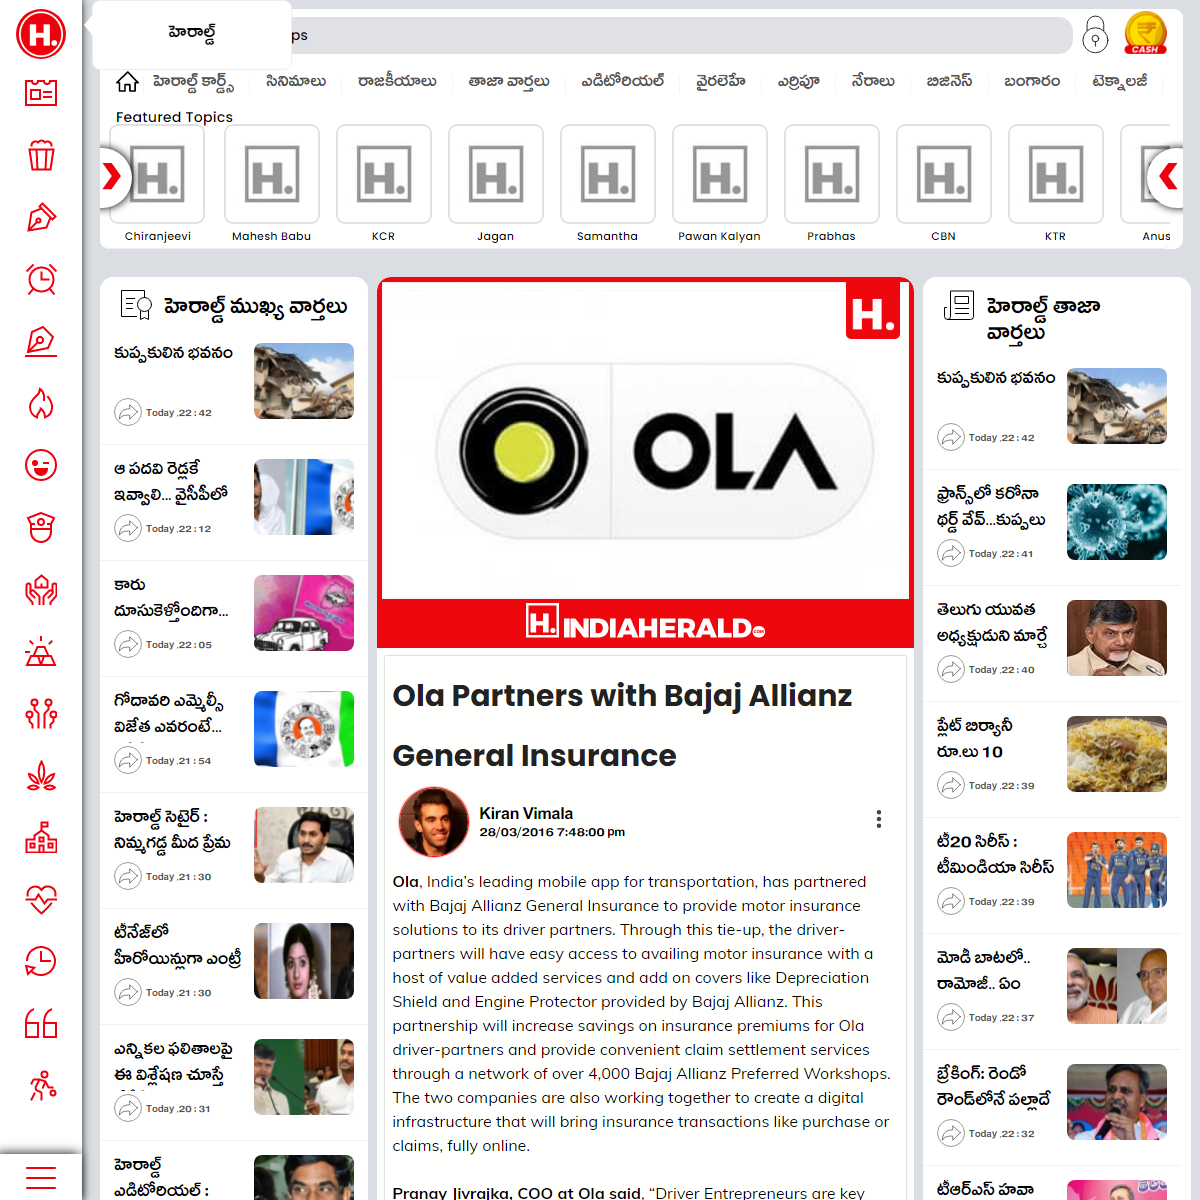 A complete backup of https://www.apherald.com/Auto/ViewArticle/122438/Ola-Partners-with-Bajaj-Allianz-General-Insurance/